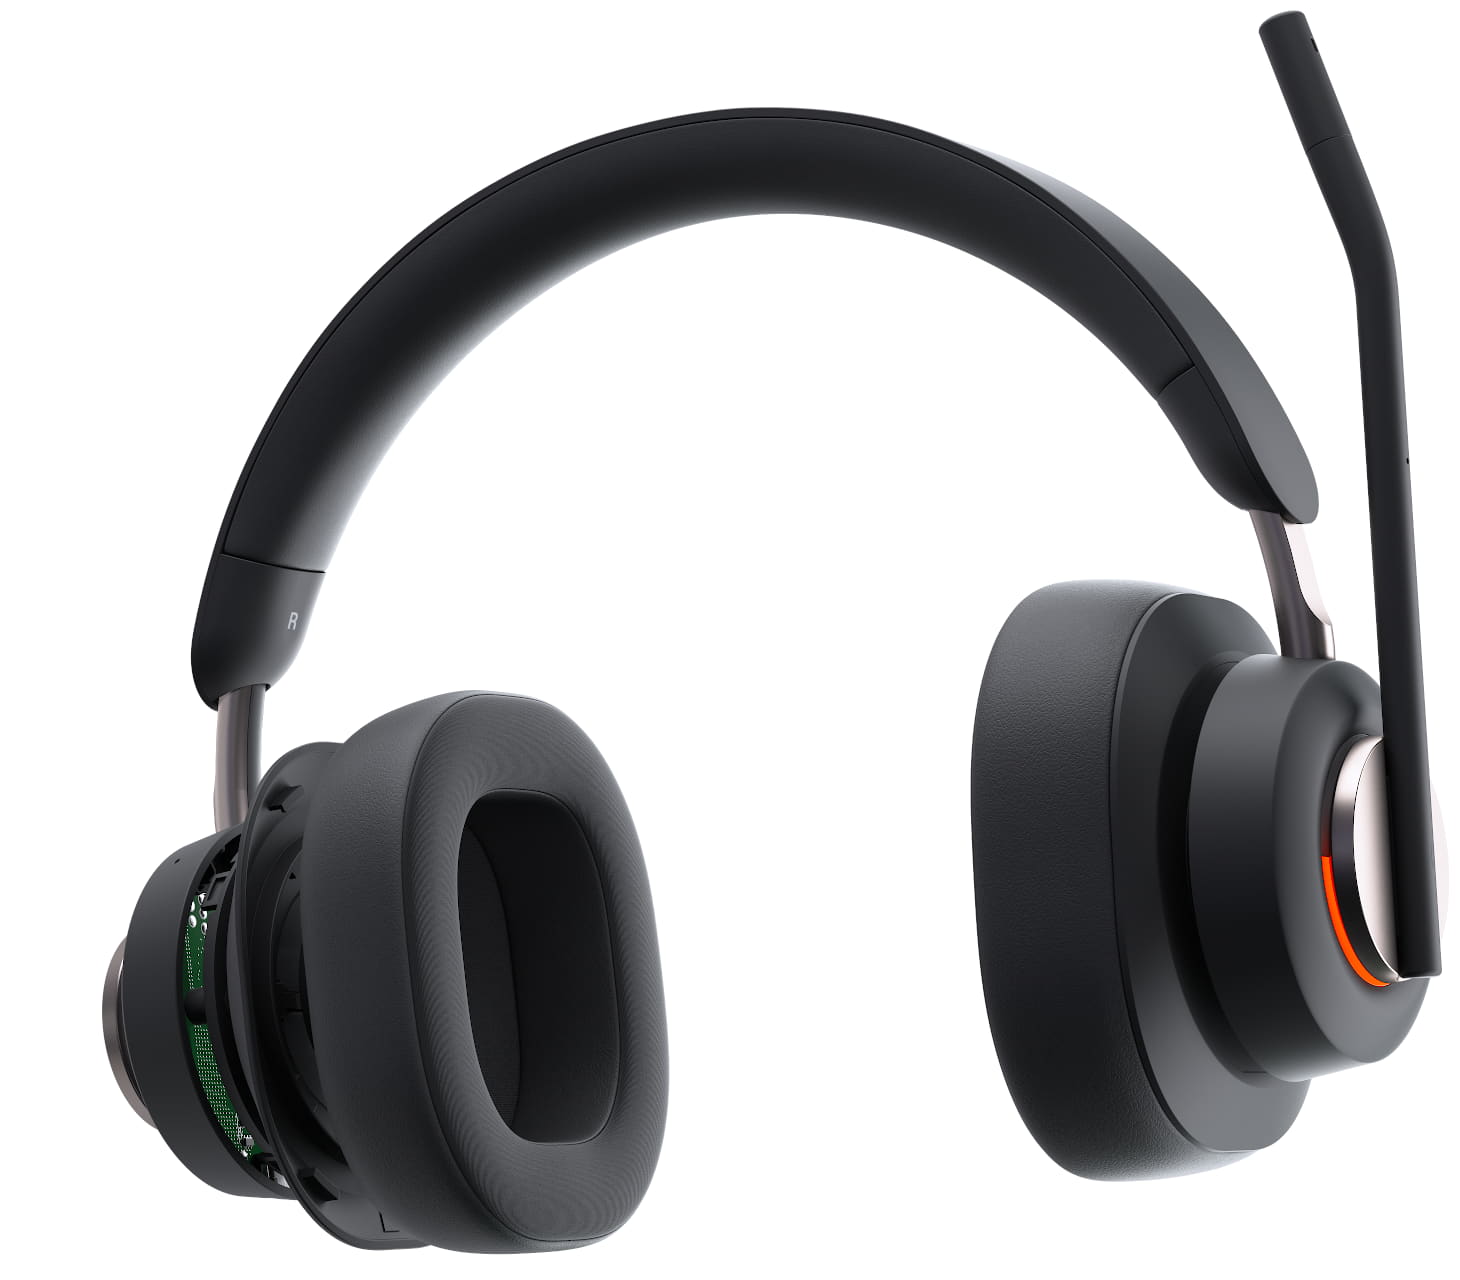 Close up front view of Kensington H3000 Bluetooth Over-Ear Headset with busy light illuminated, mic in flip-to-mute position, and right ear cup expanding to show technology